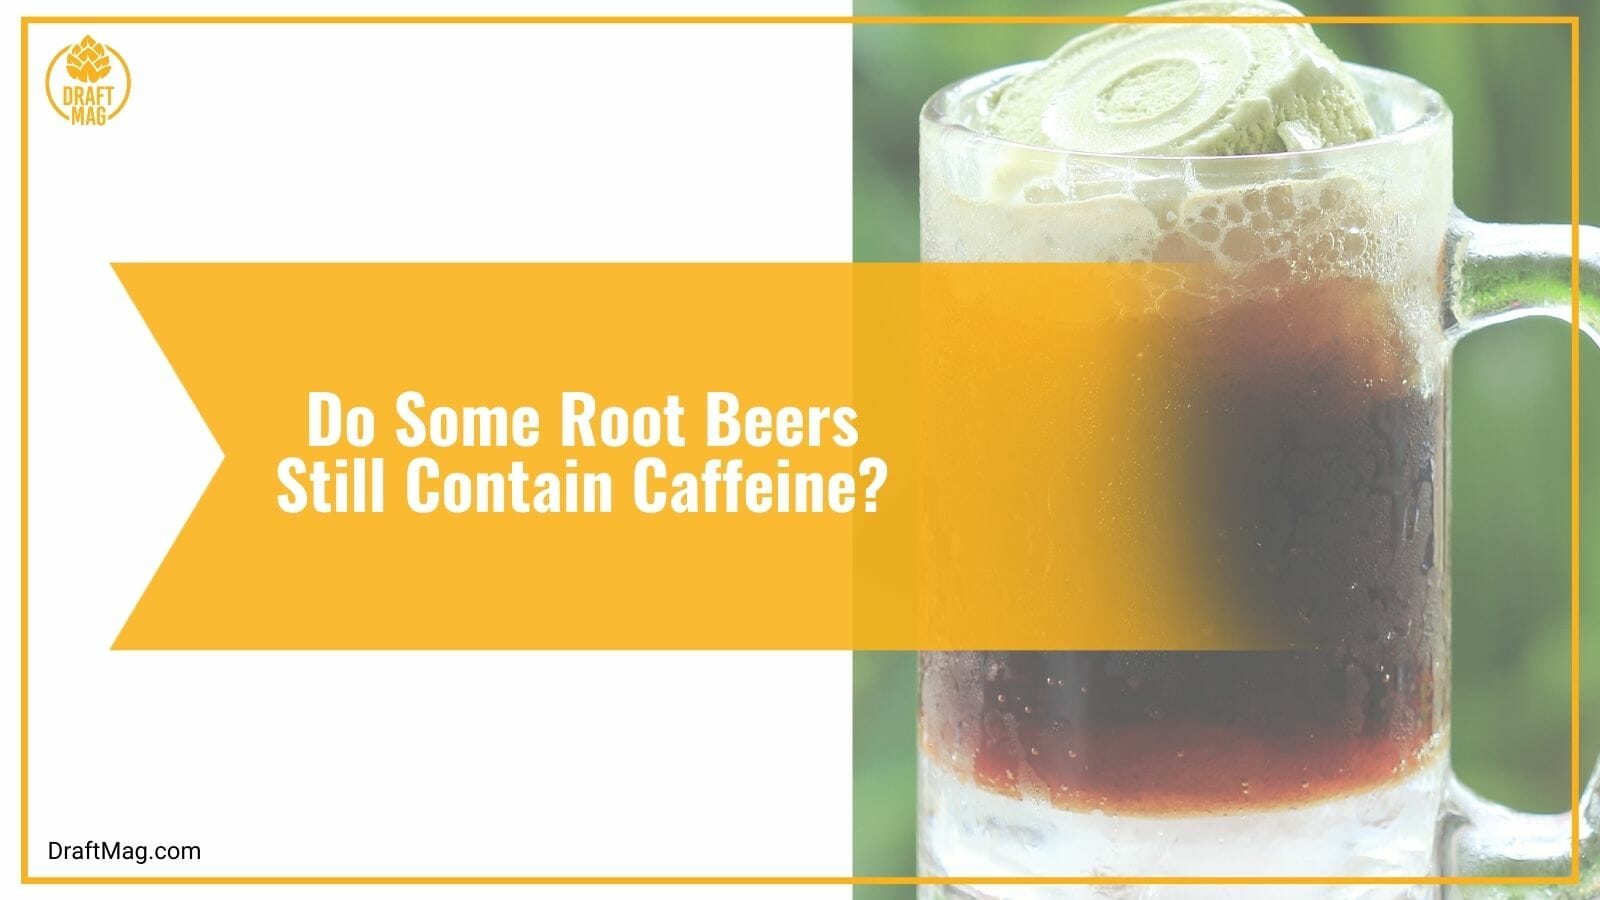 Do Some Root Beers Still Contain Caffeine